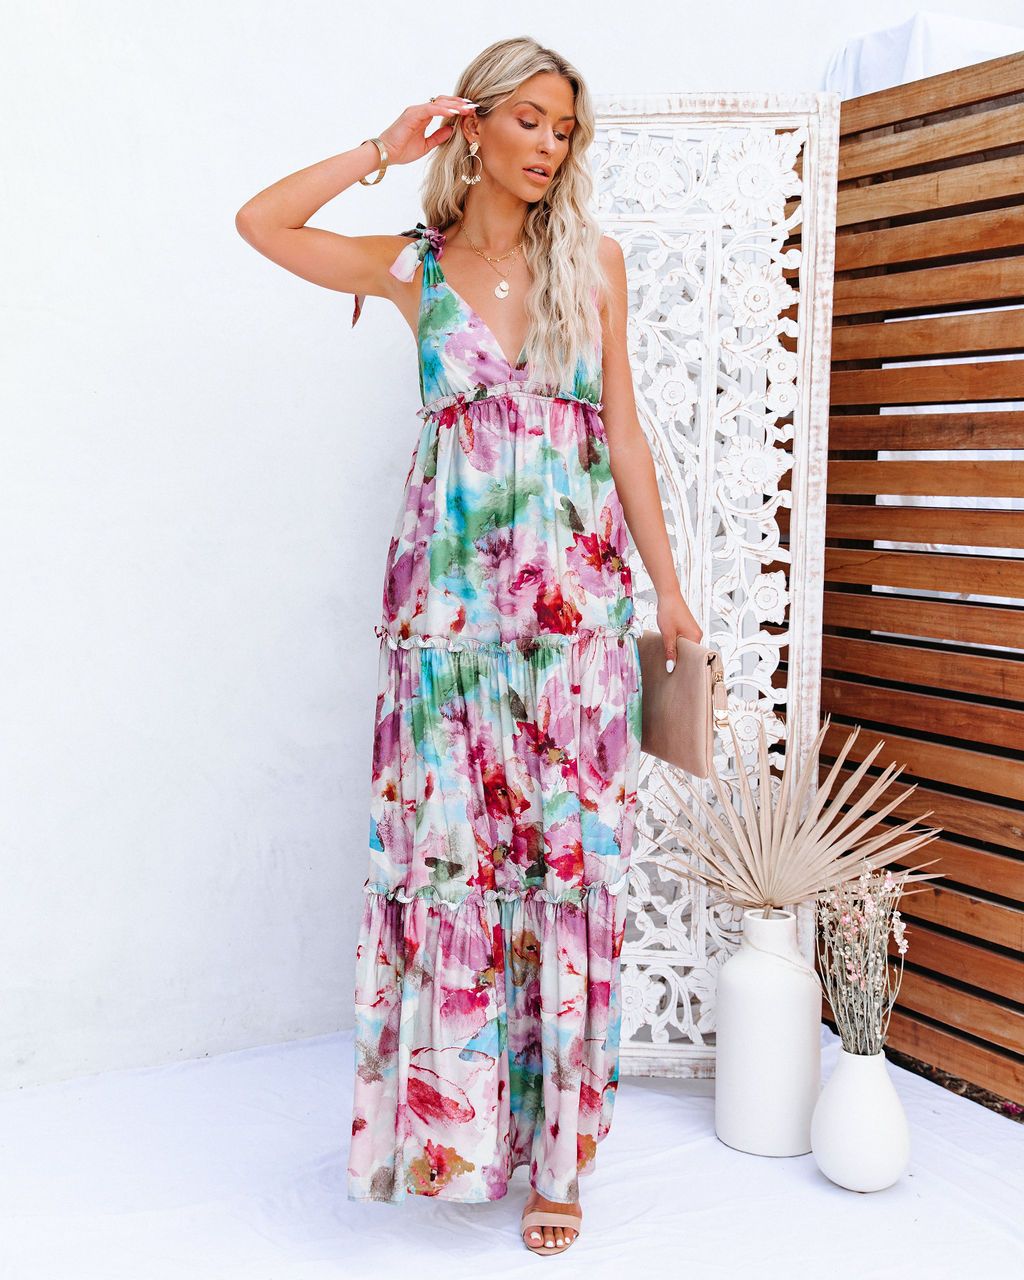 Beyond The Waterfall Pocketed Tiered Maxi Dress - FINAL SALE InsStreet